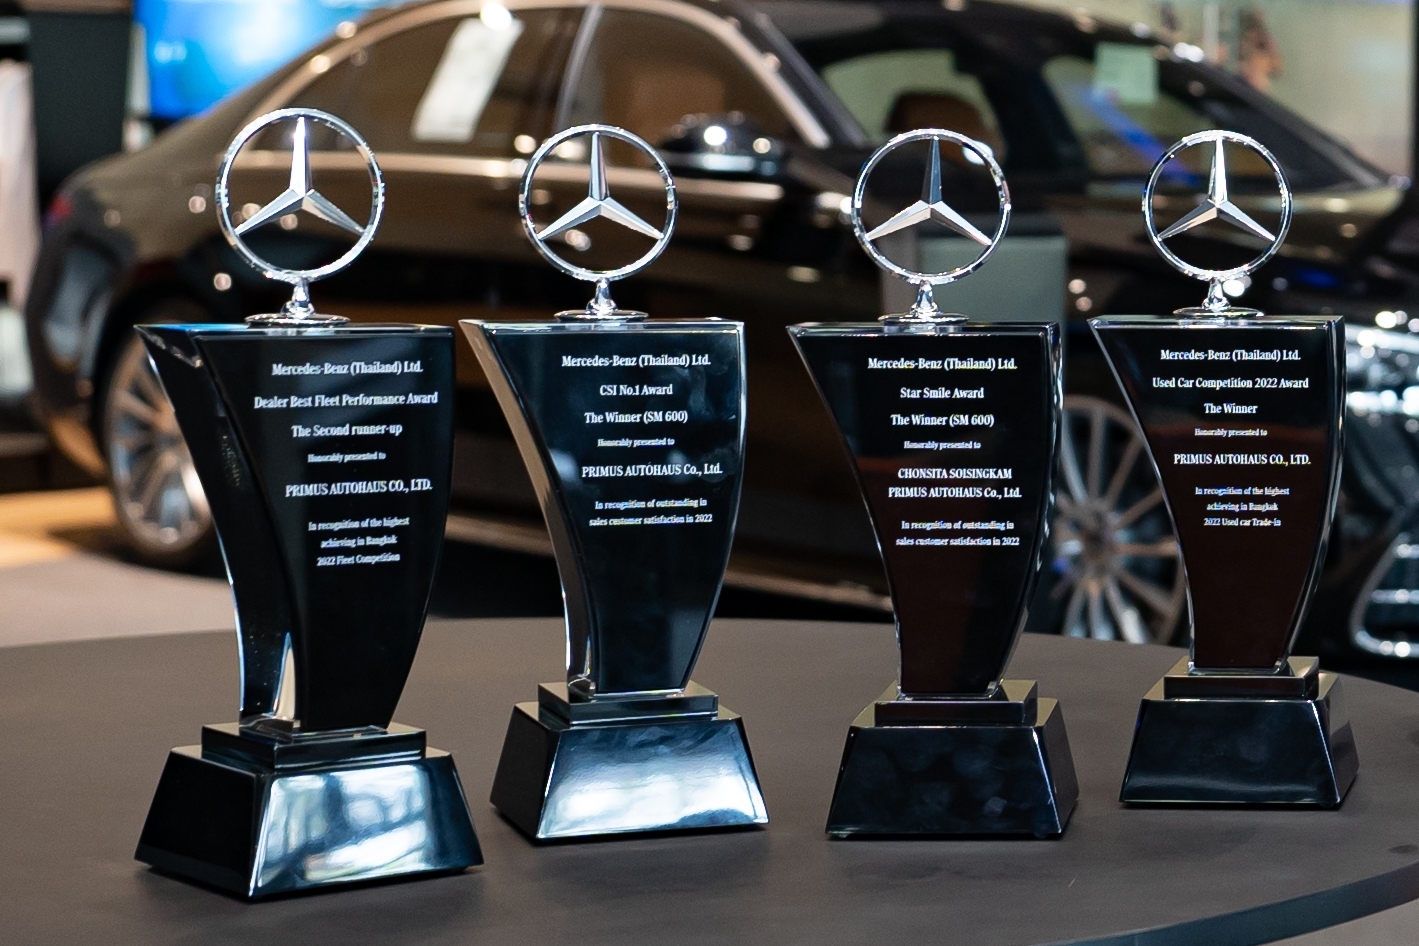 "Benz Primus” Wins 4 Honored Awards